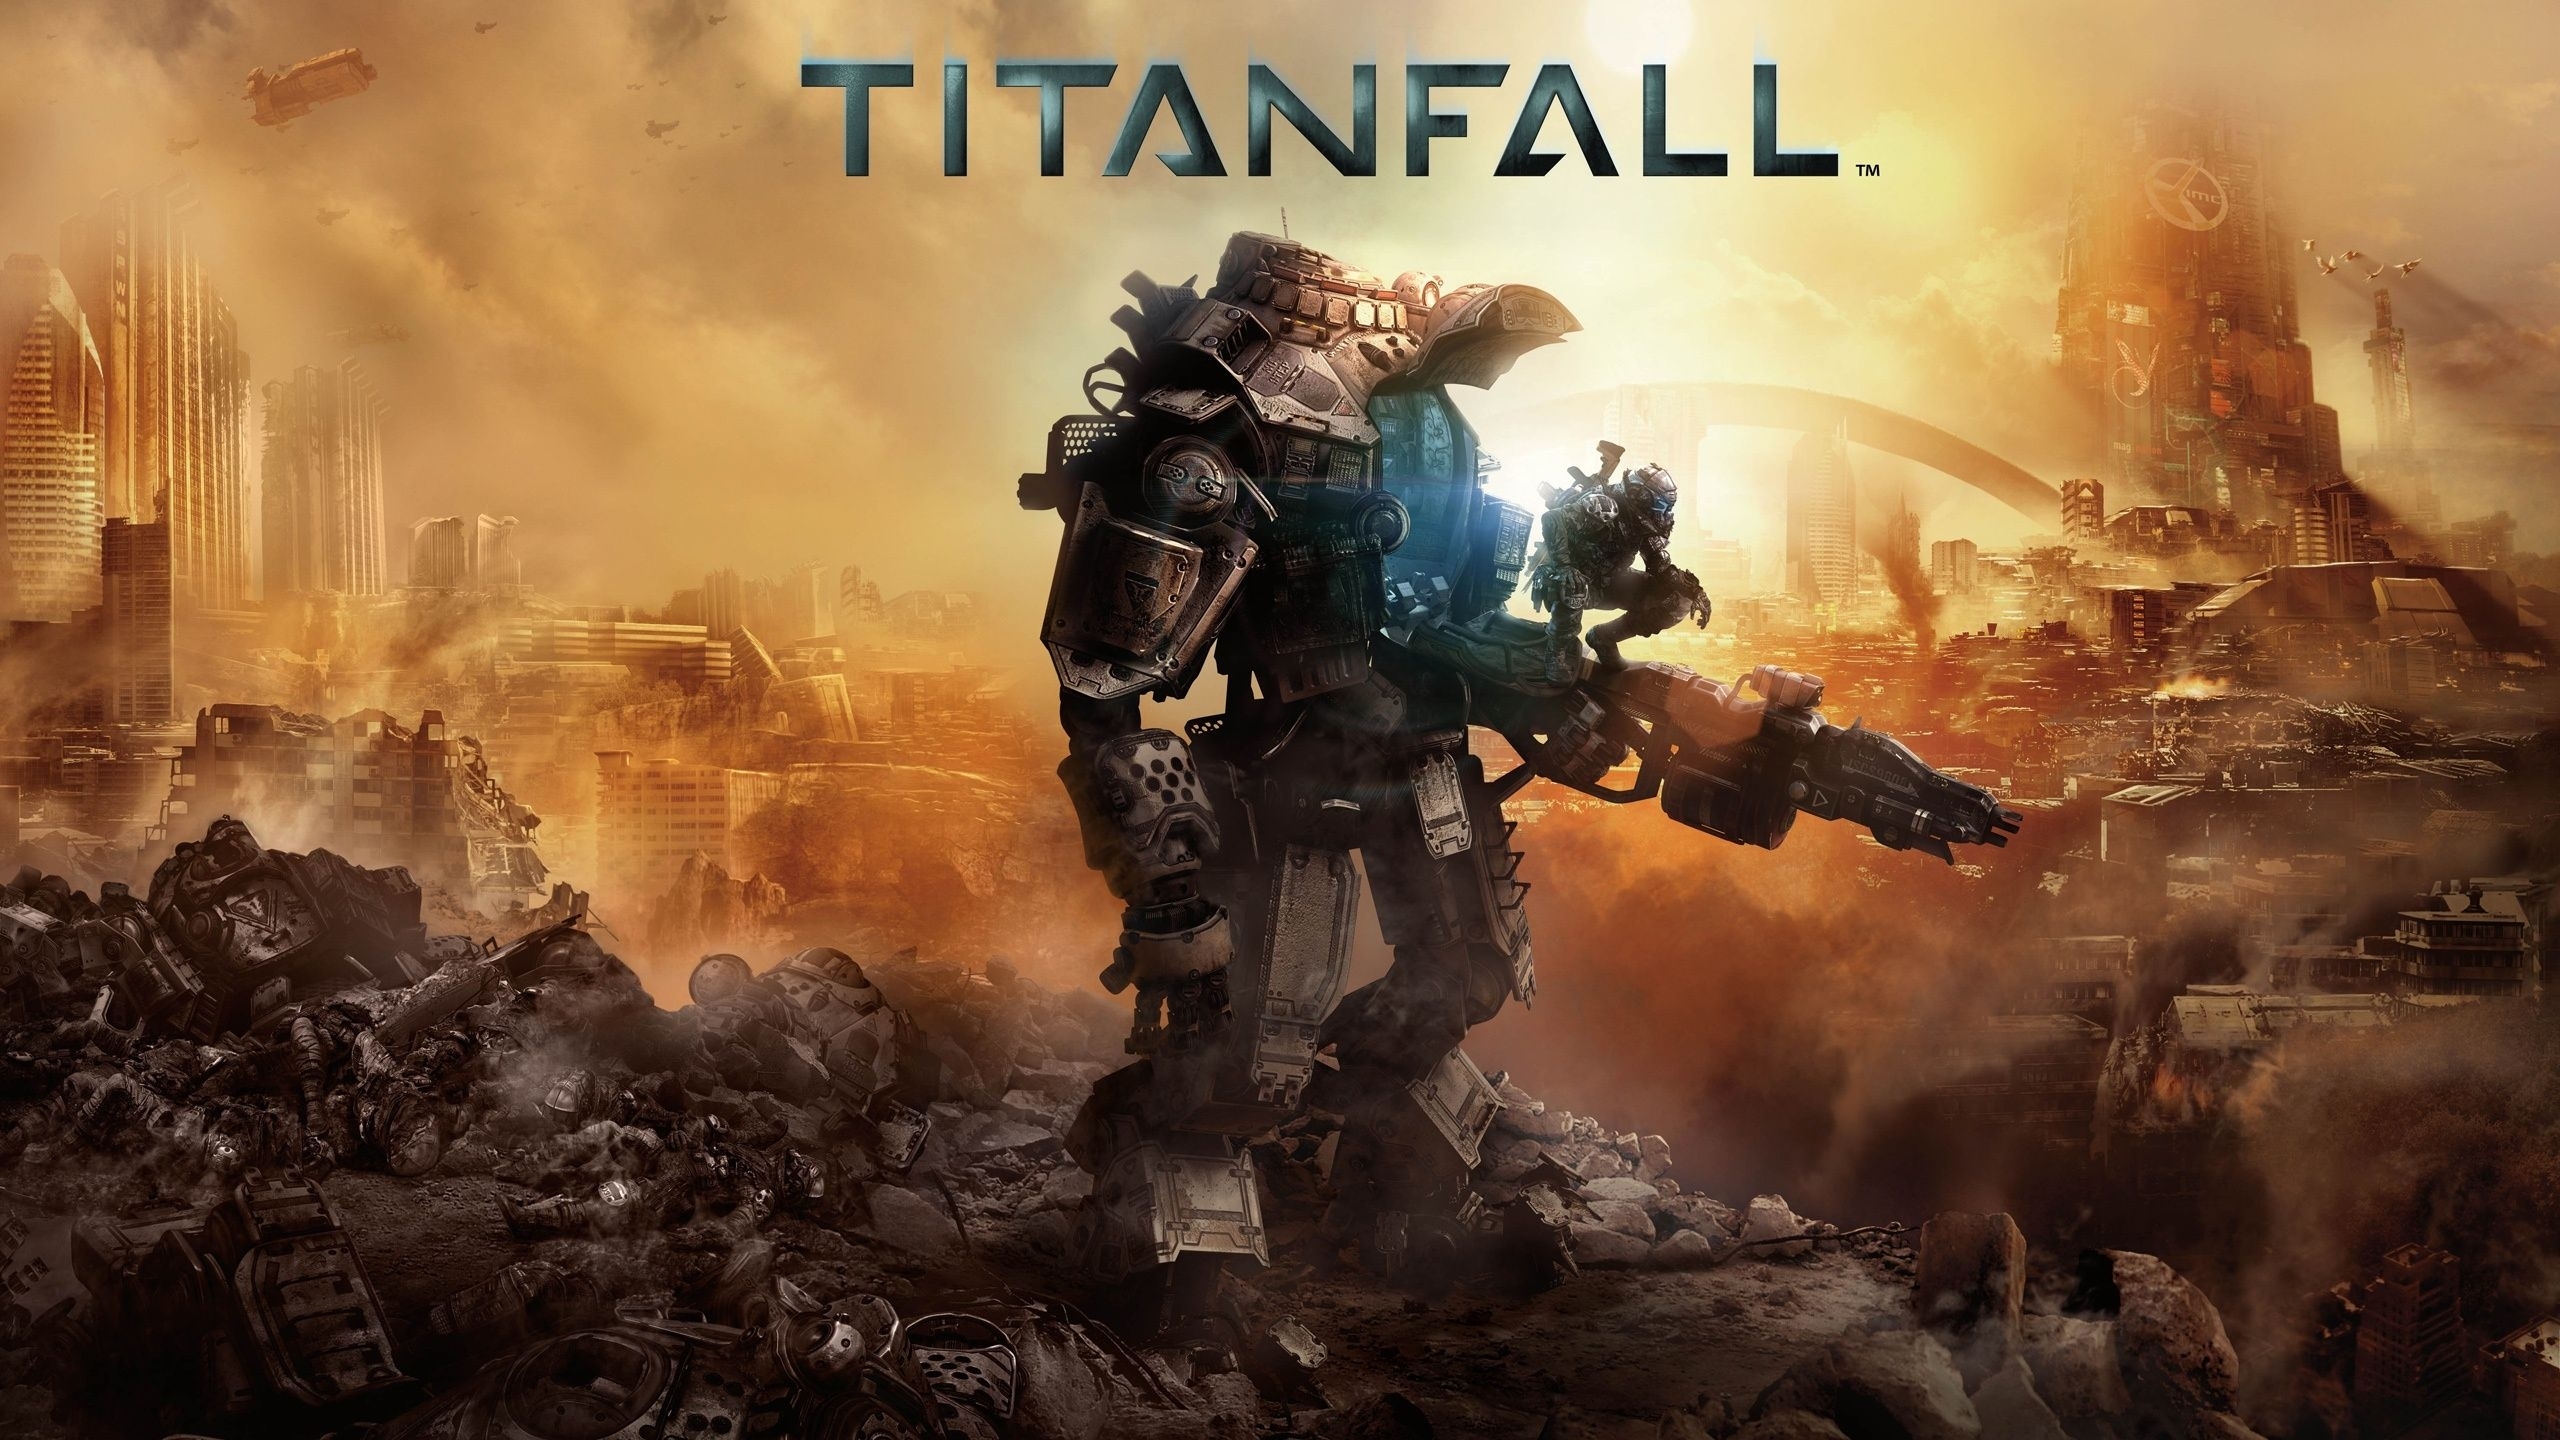 10 Best Titanfall 2 Hd Wallpaper FULL HD 1080p For PC Background 2021